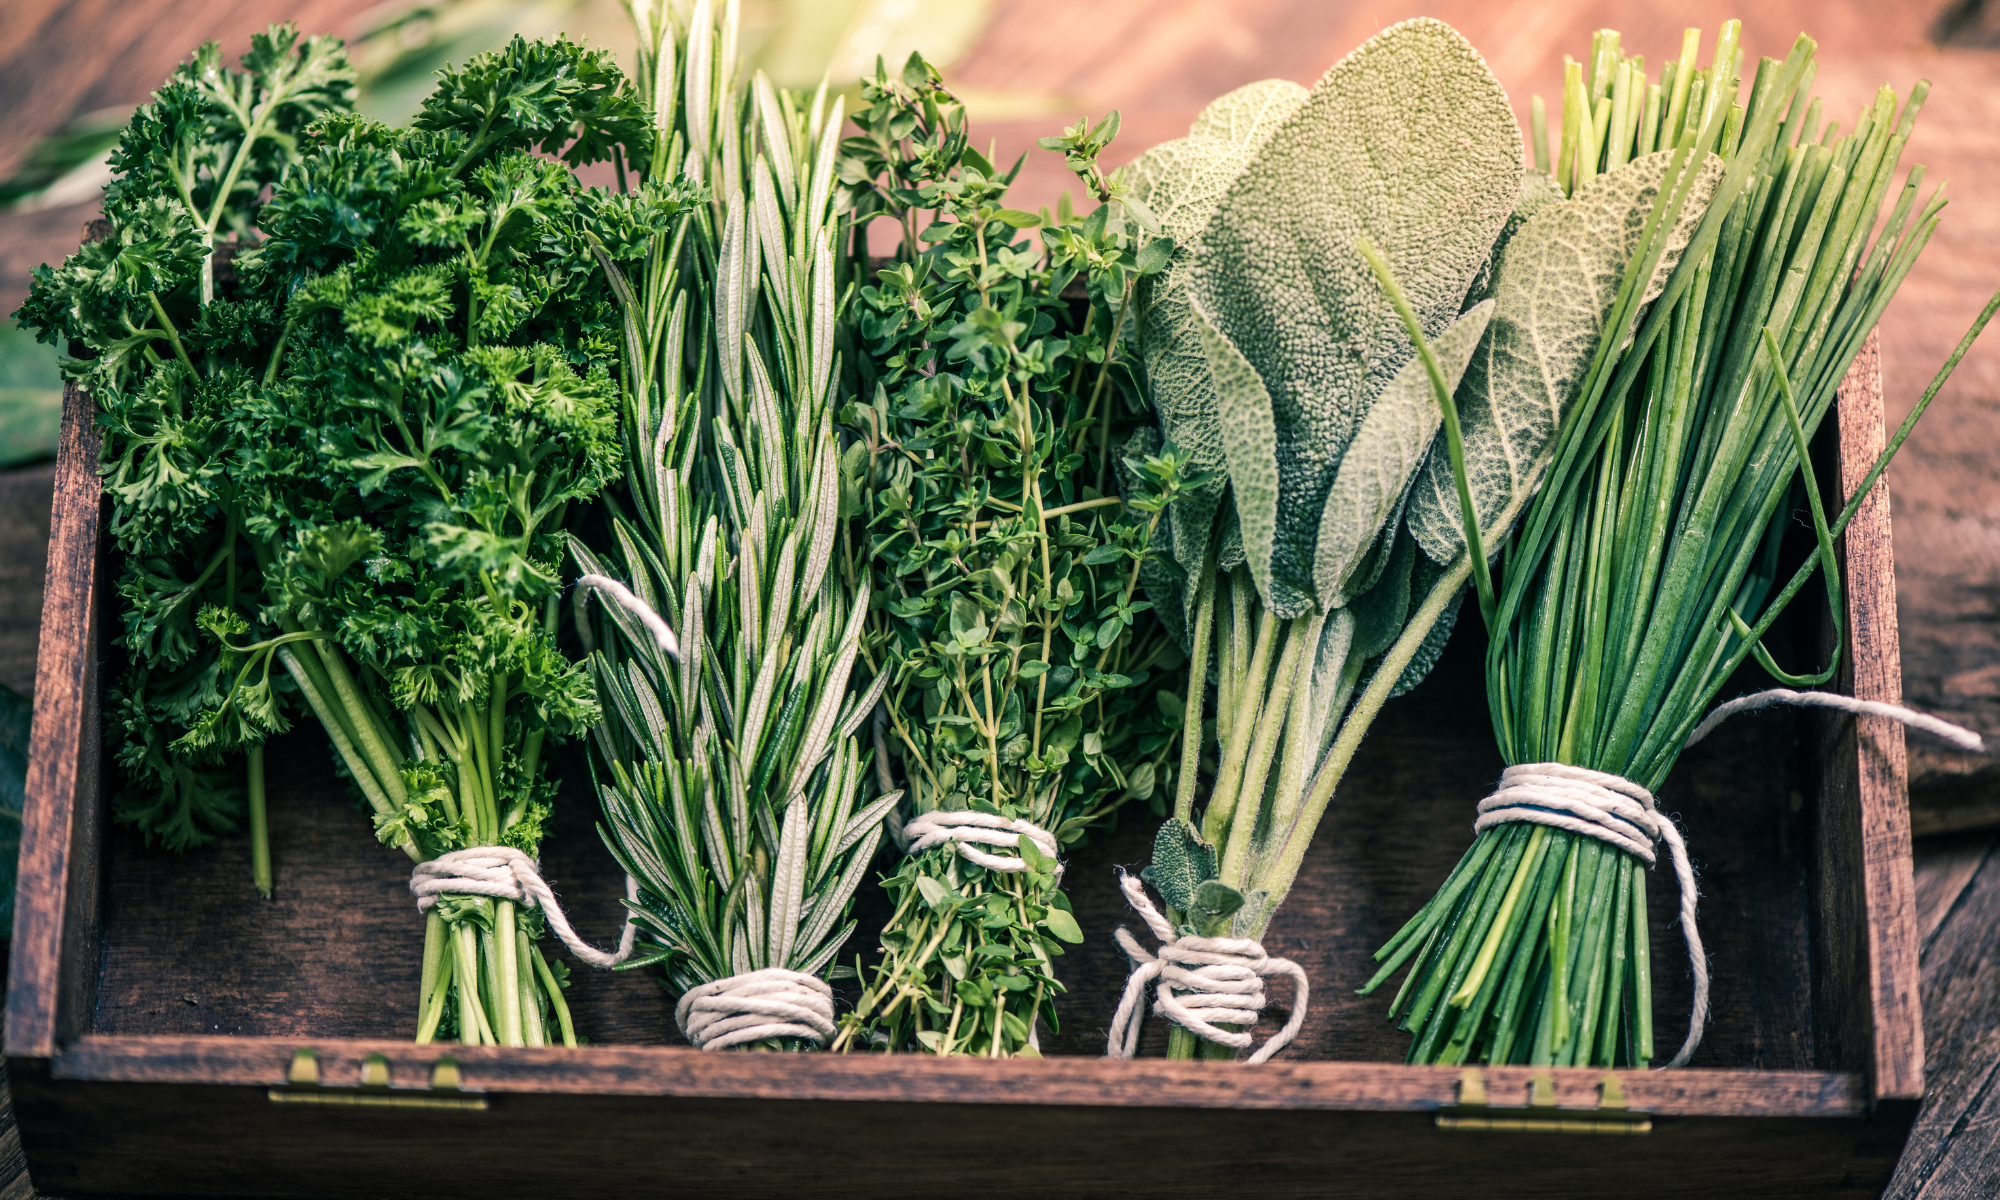 How to Start an Herb Garden on Your Balcony